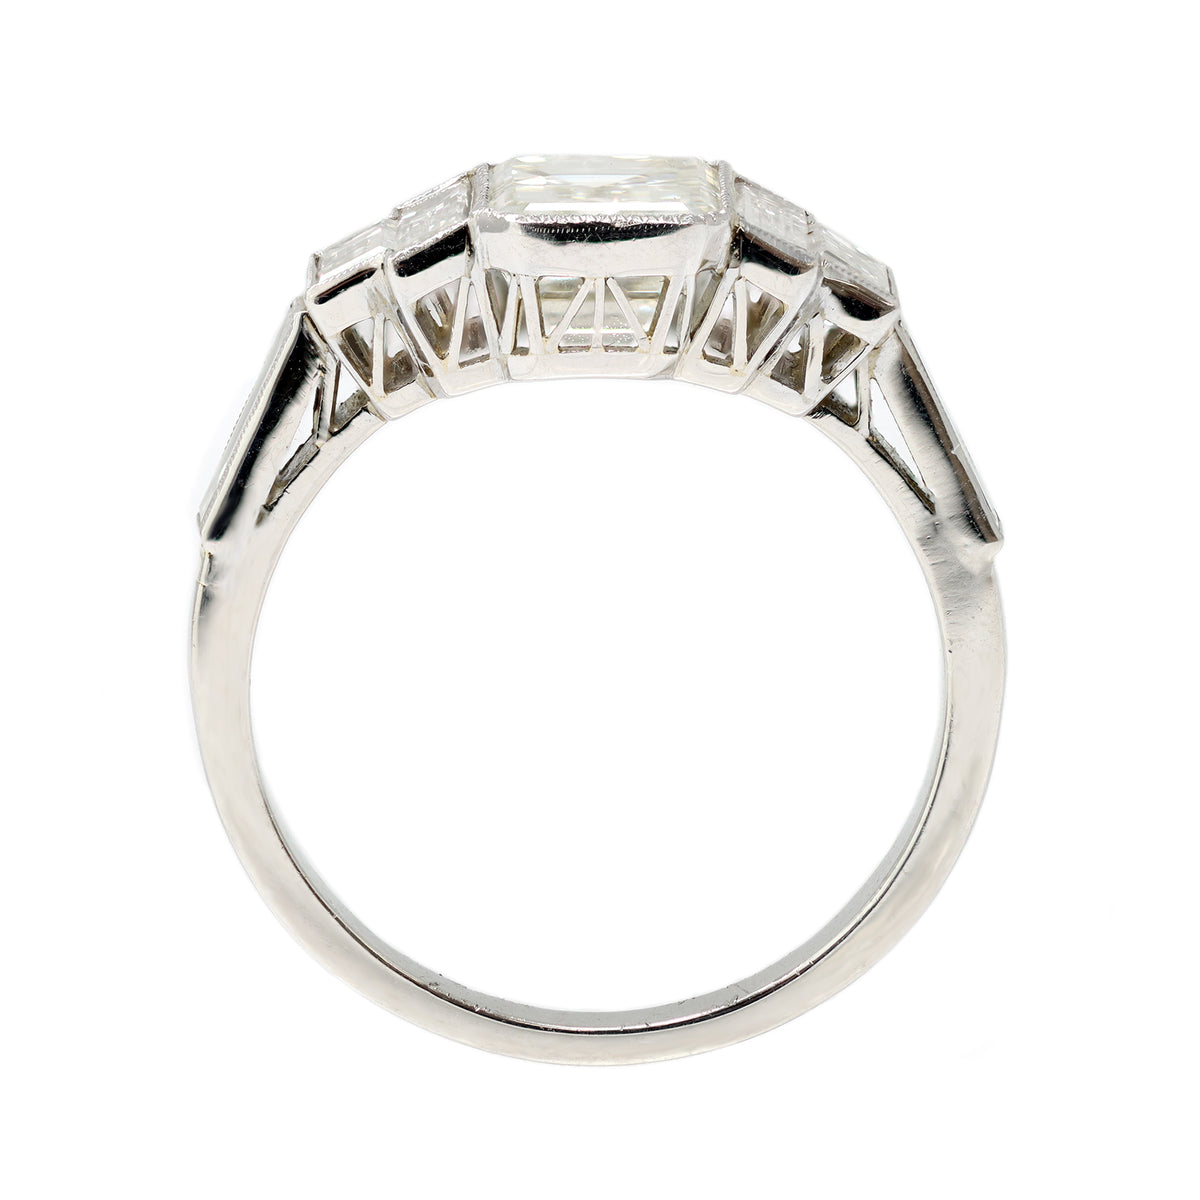 An Elegant Emerald-cut Diamond Ring with side baguettes set in Platinum front view